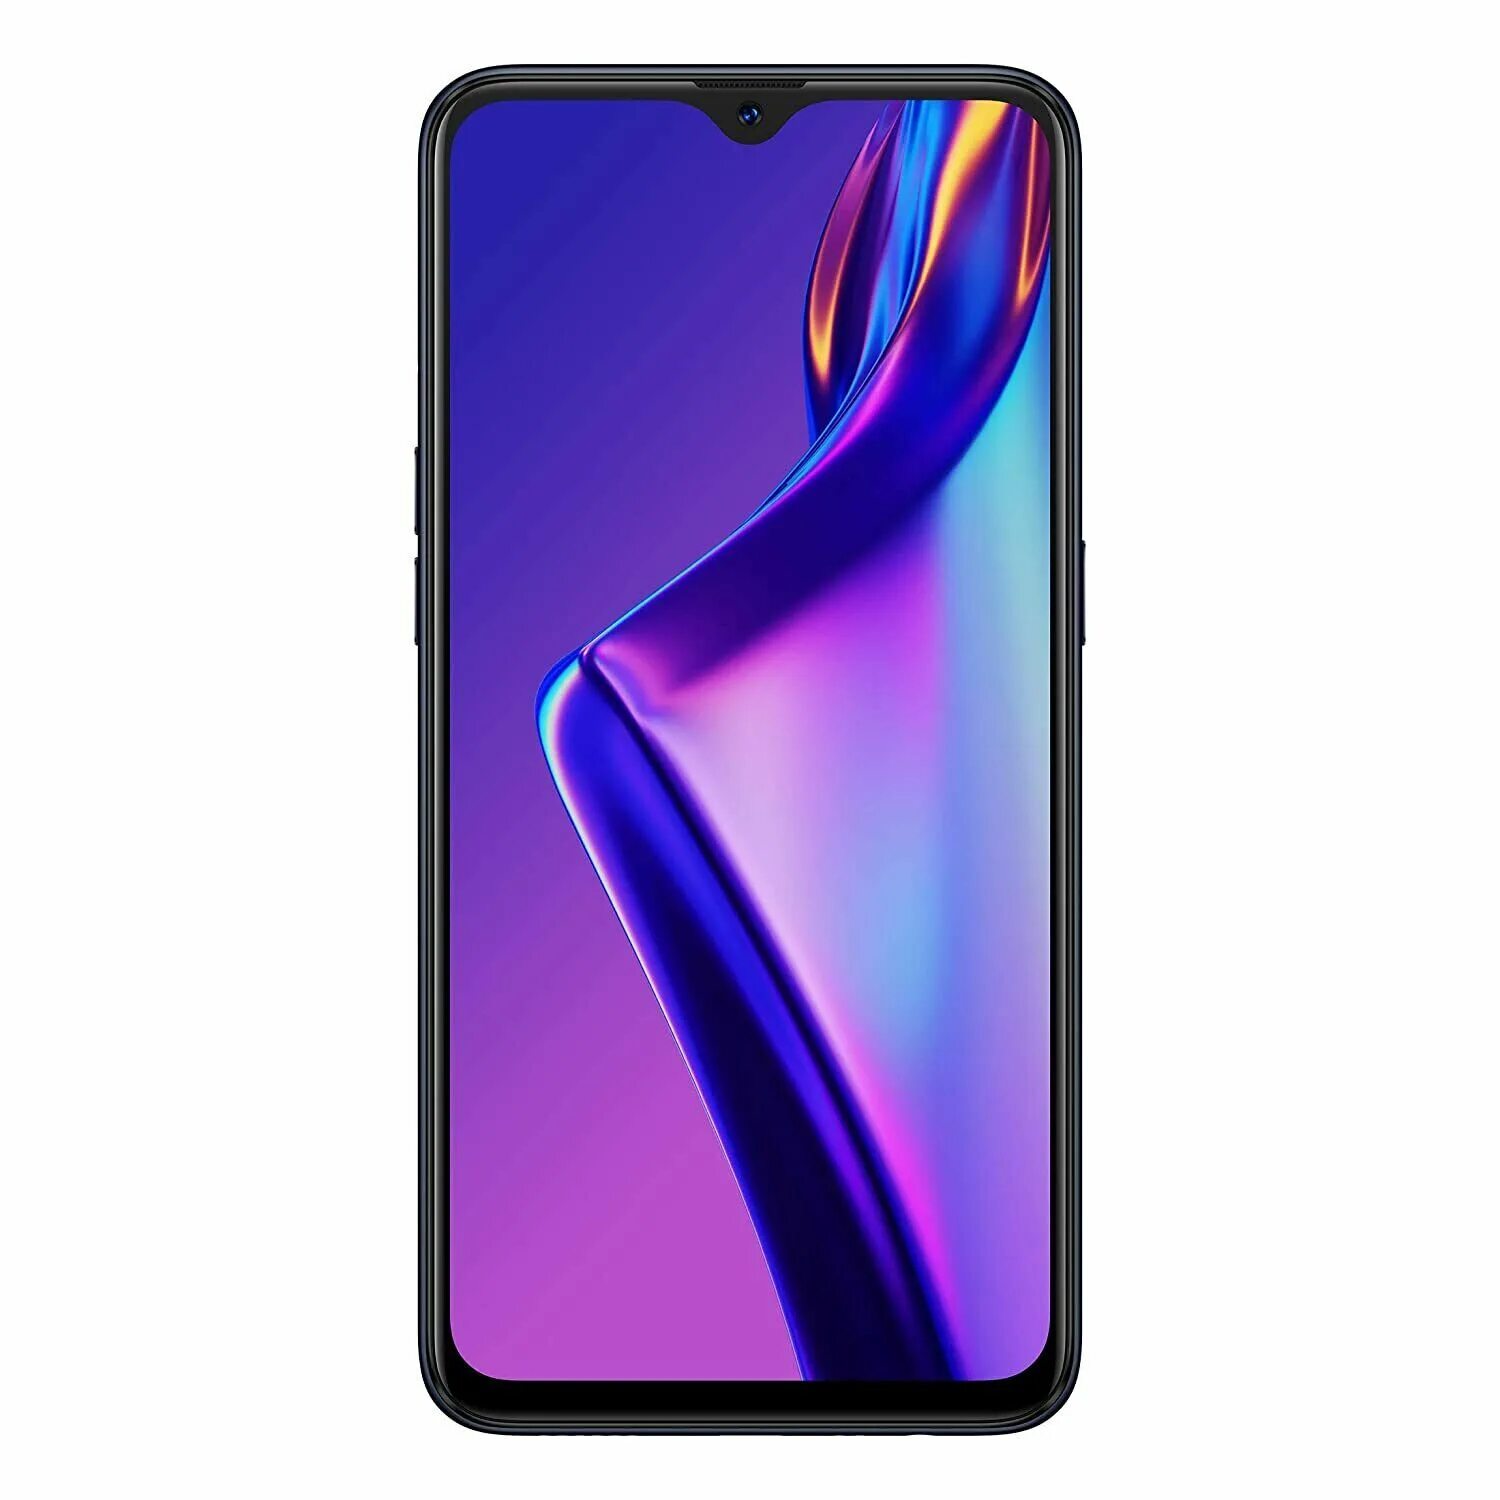 Oppo a12 3/32gb. Смартфон Oppo a15 2+32gb. Oppo a12 3/32gb - Black. Смартфон Oppo a15 2/32gb Black.